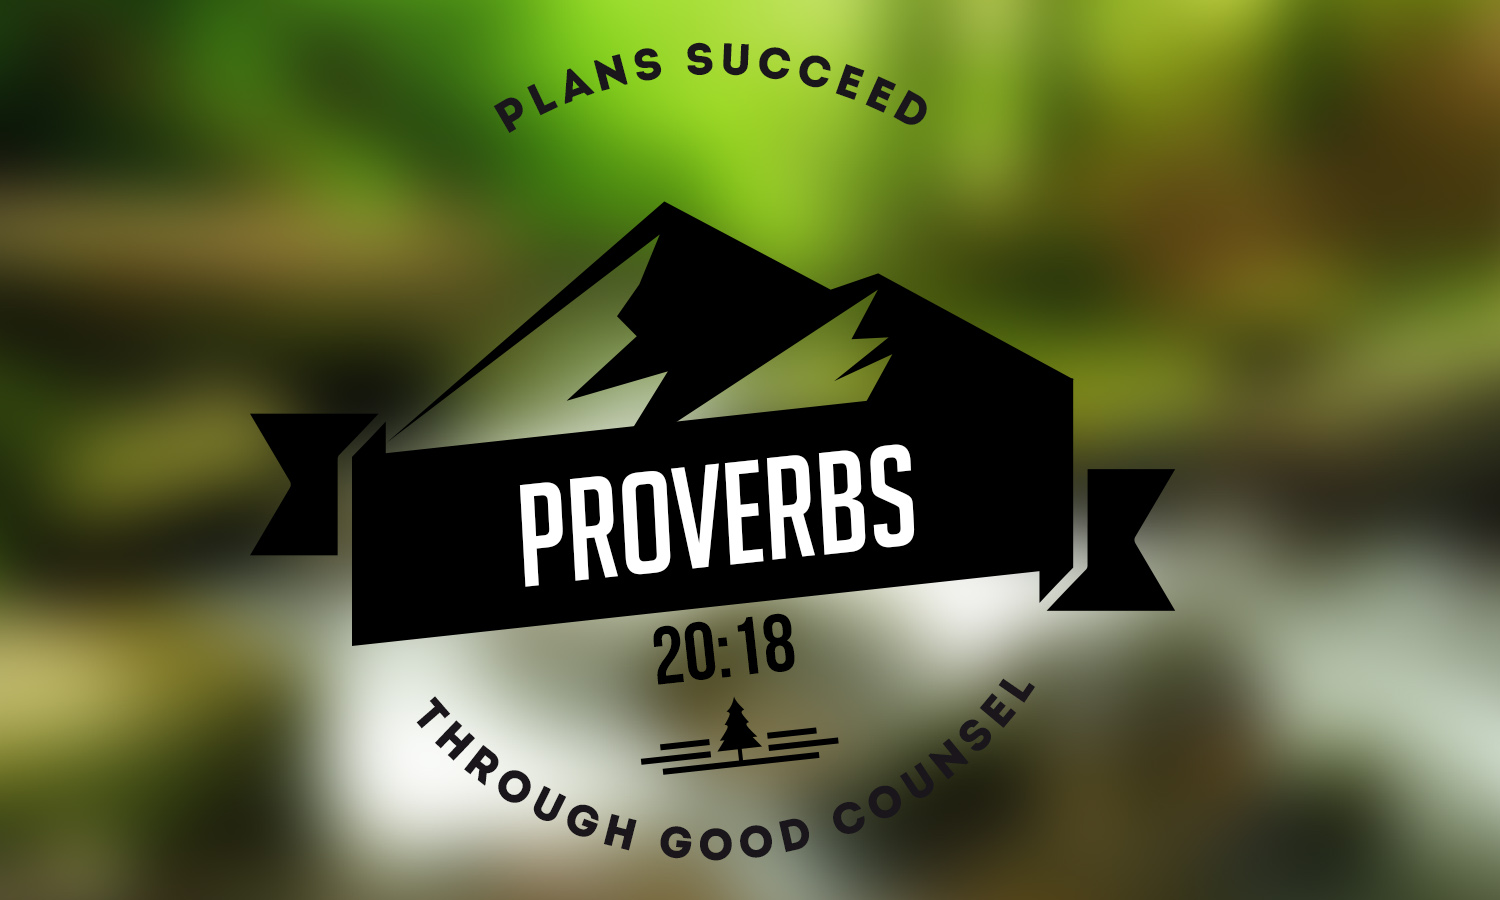 Proverbs 20:18

Plans succeed through good counsel.